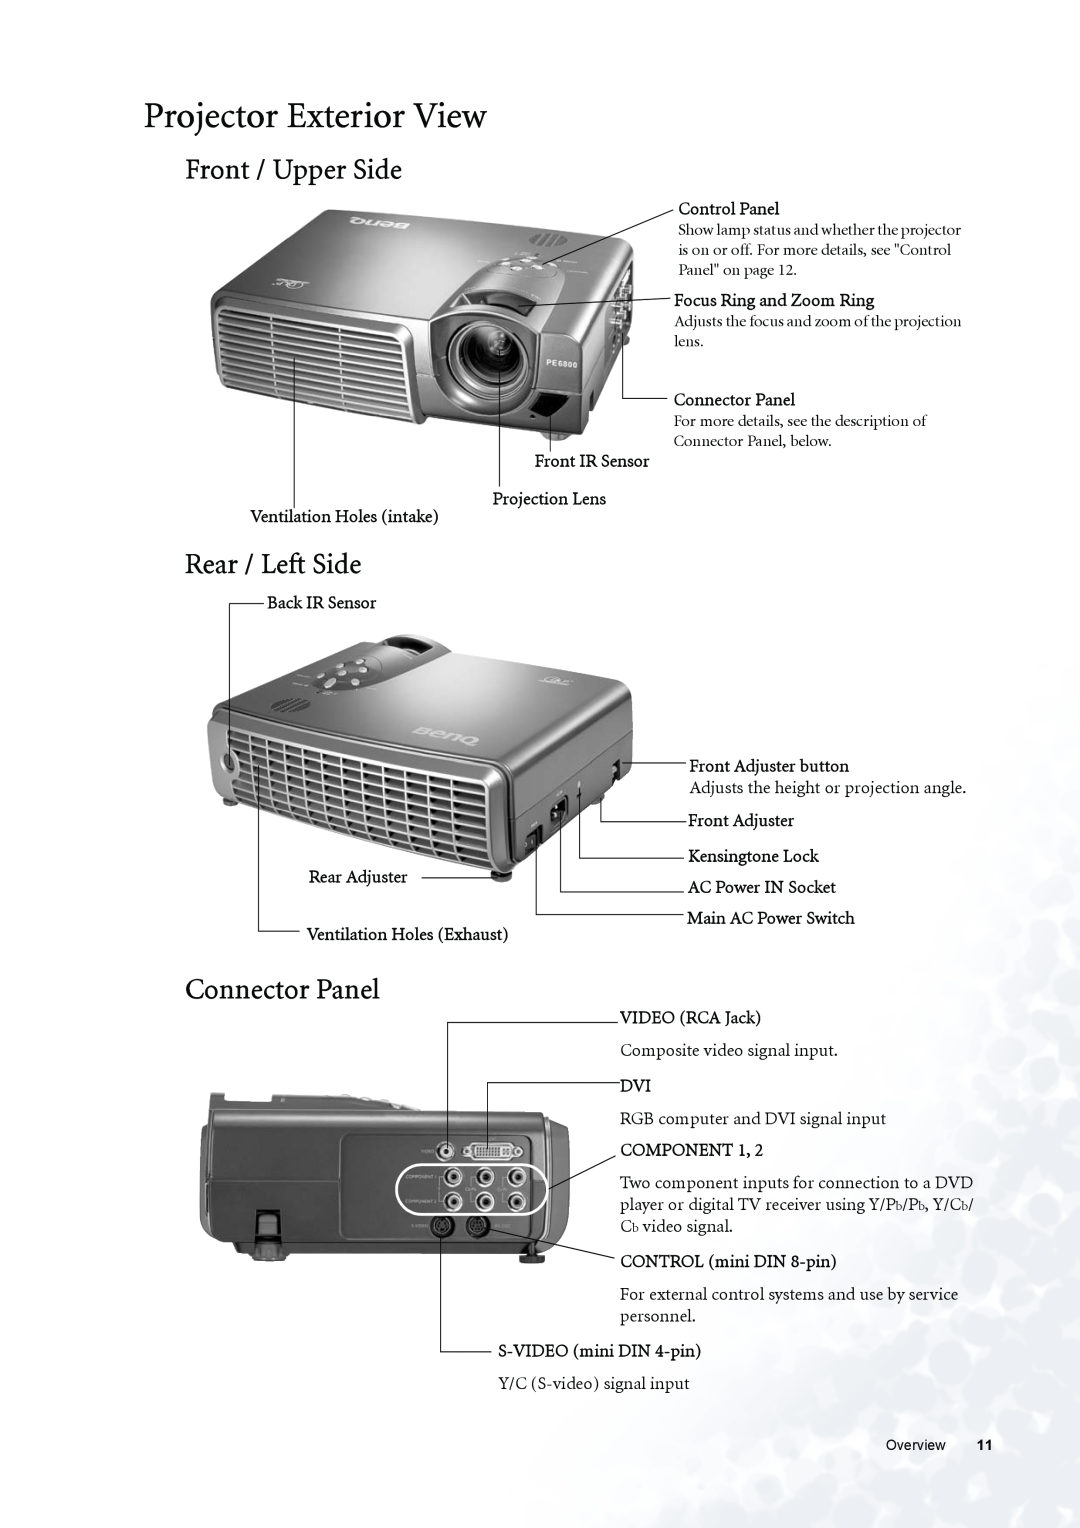 BenQ PE6800 user manual Projector Exterior View, Front / Upper Side, Rear / Left Side, Connector Panel 